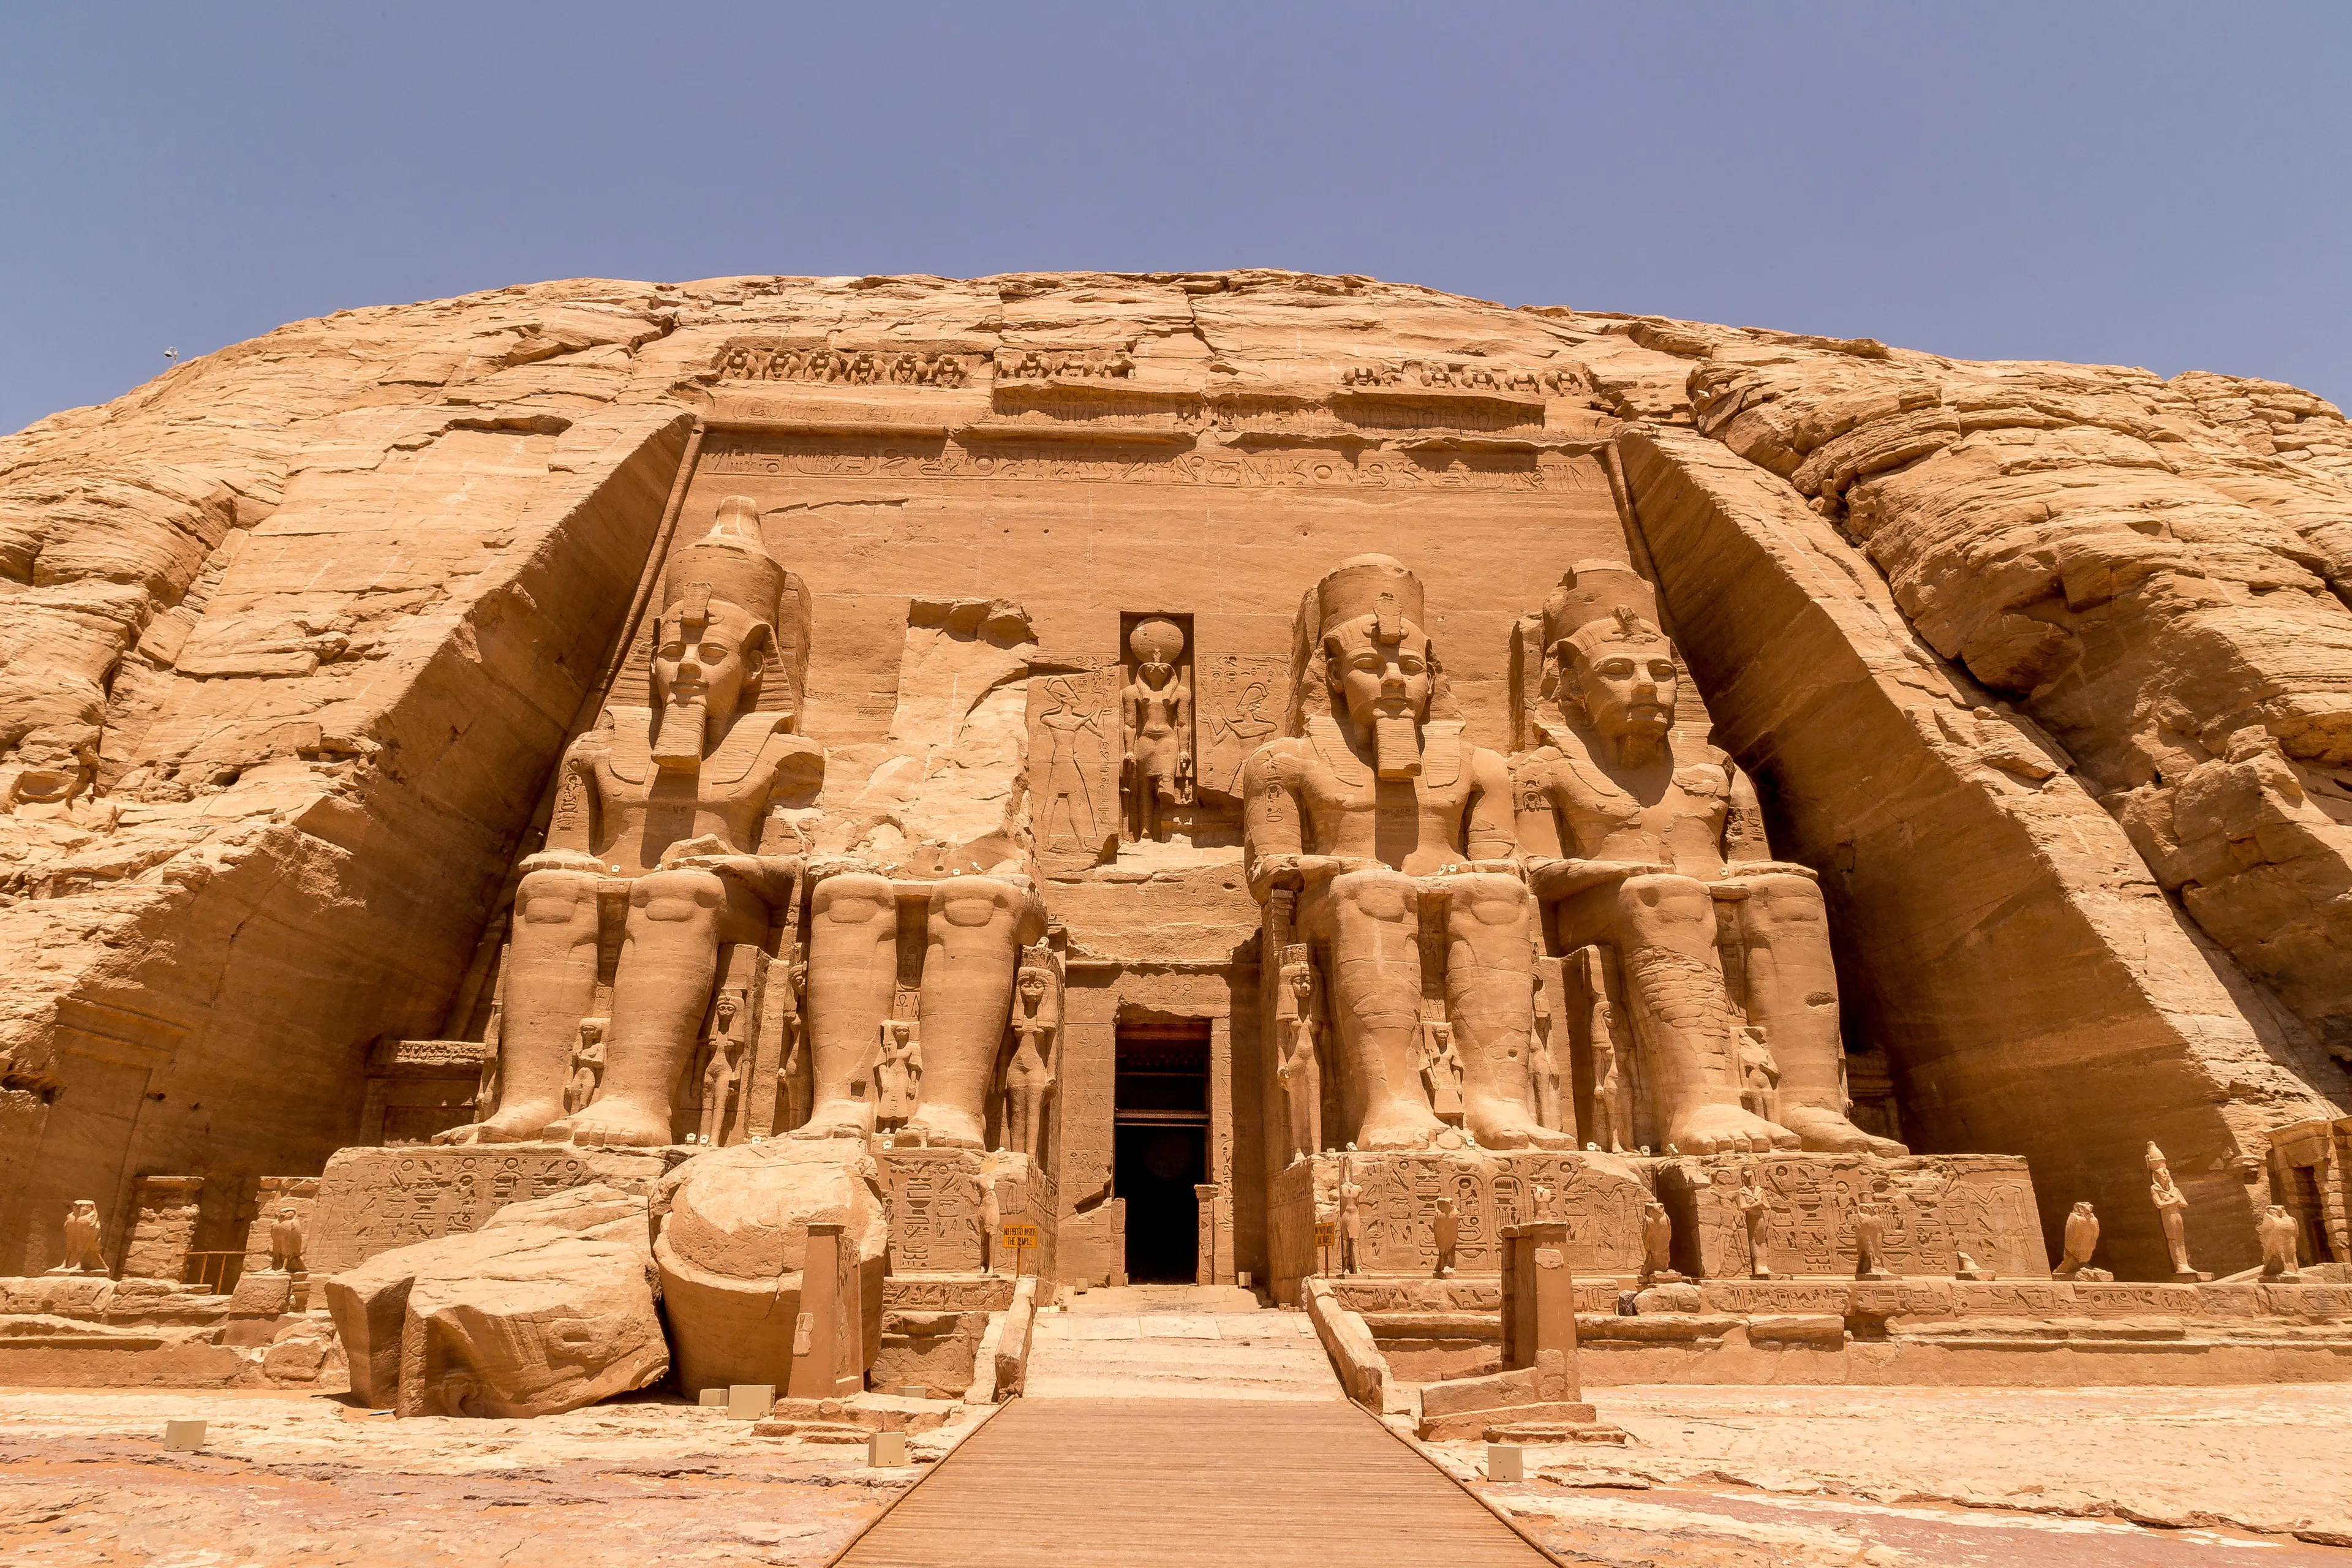 The front side of the Abu Simbel temple